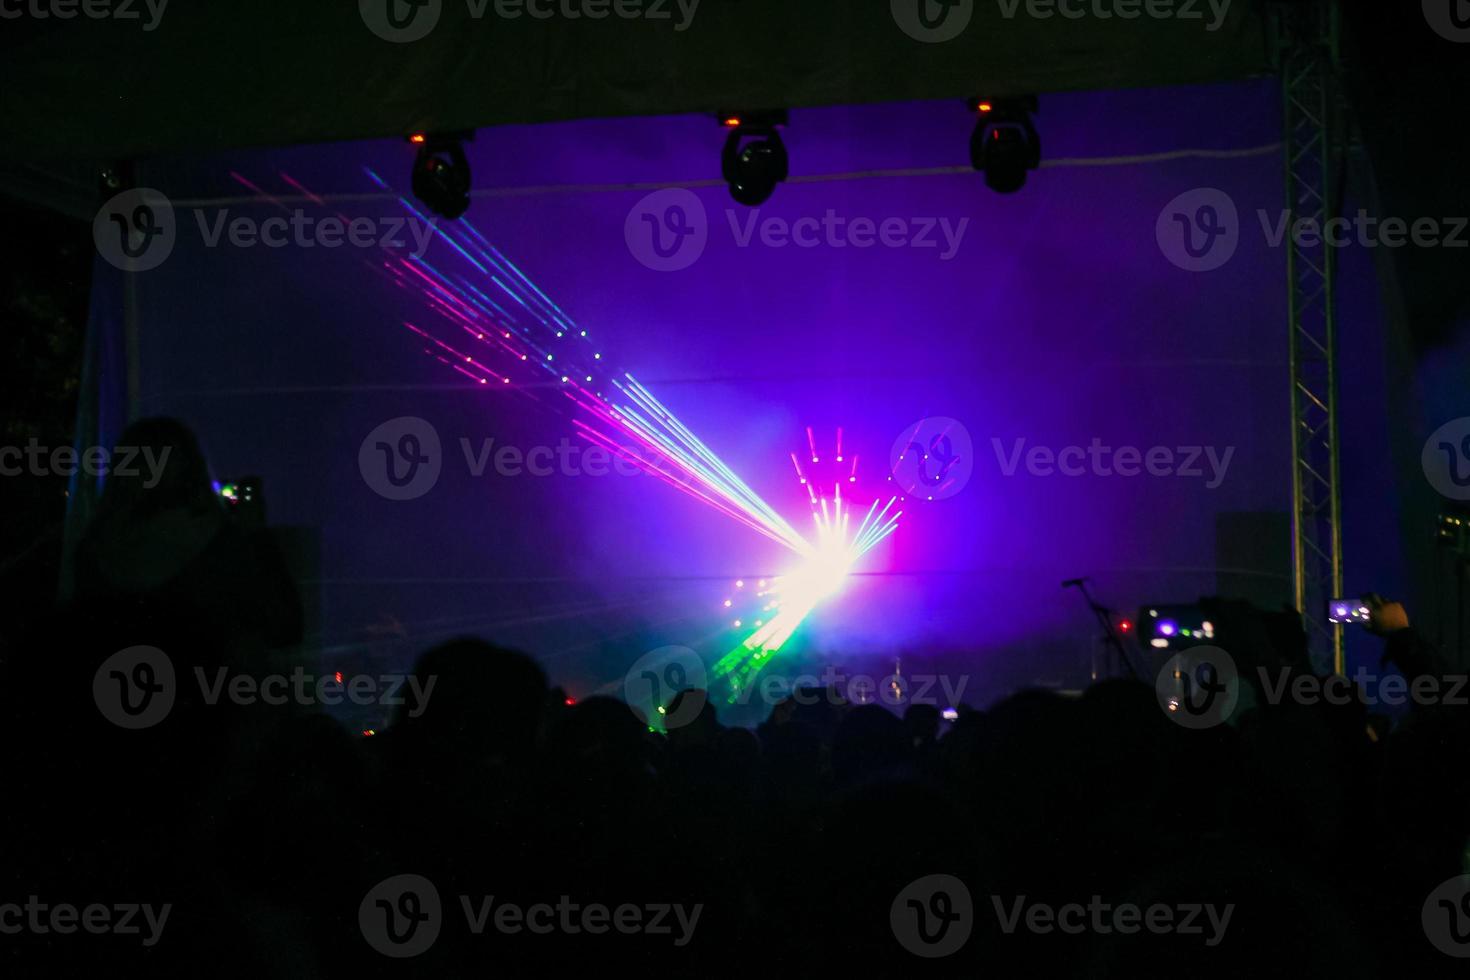 Purple laser neon beams. Crowd of people watching laser show at street festival. photo